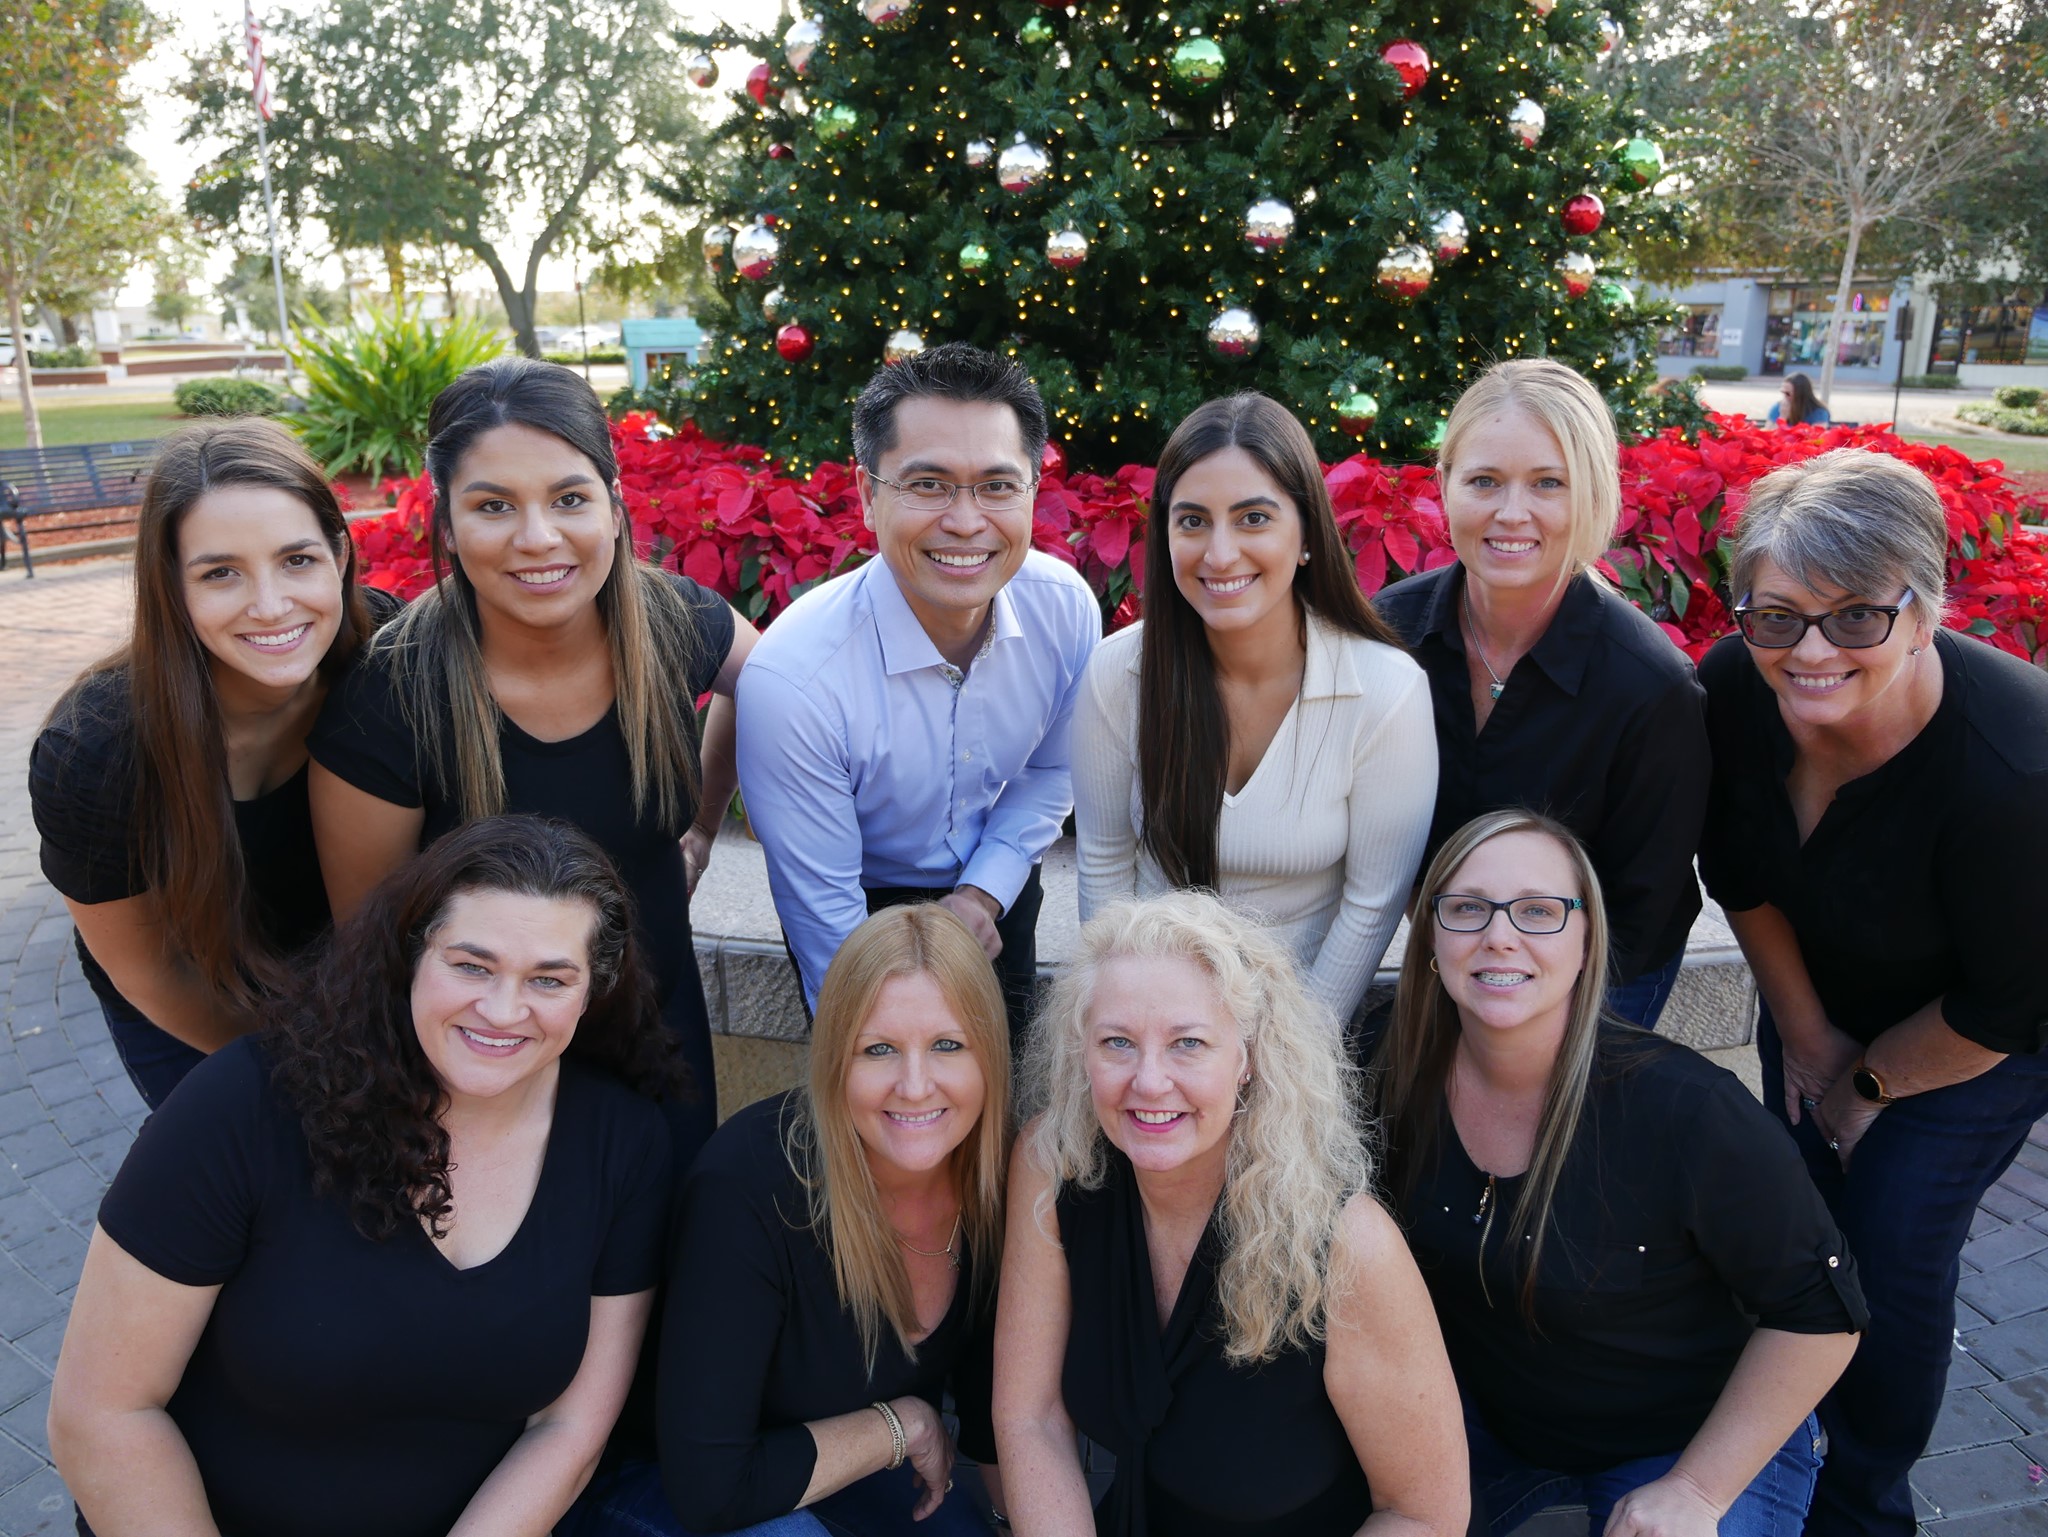 Winter Haven Family & Cosmetic Dentistry